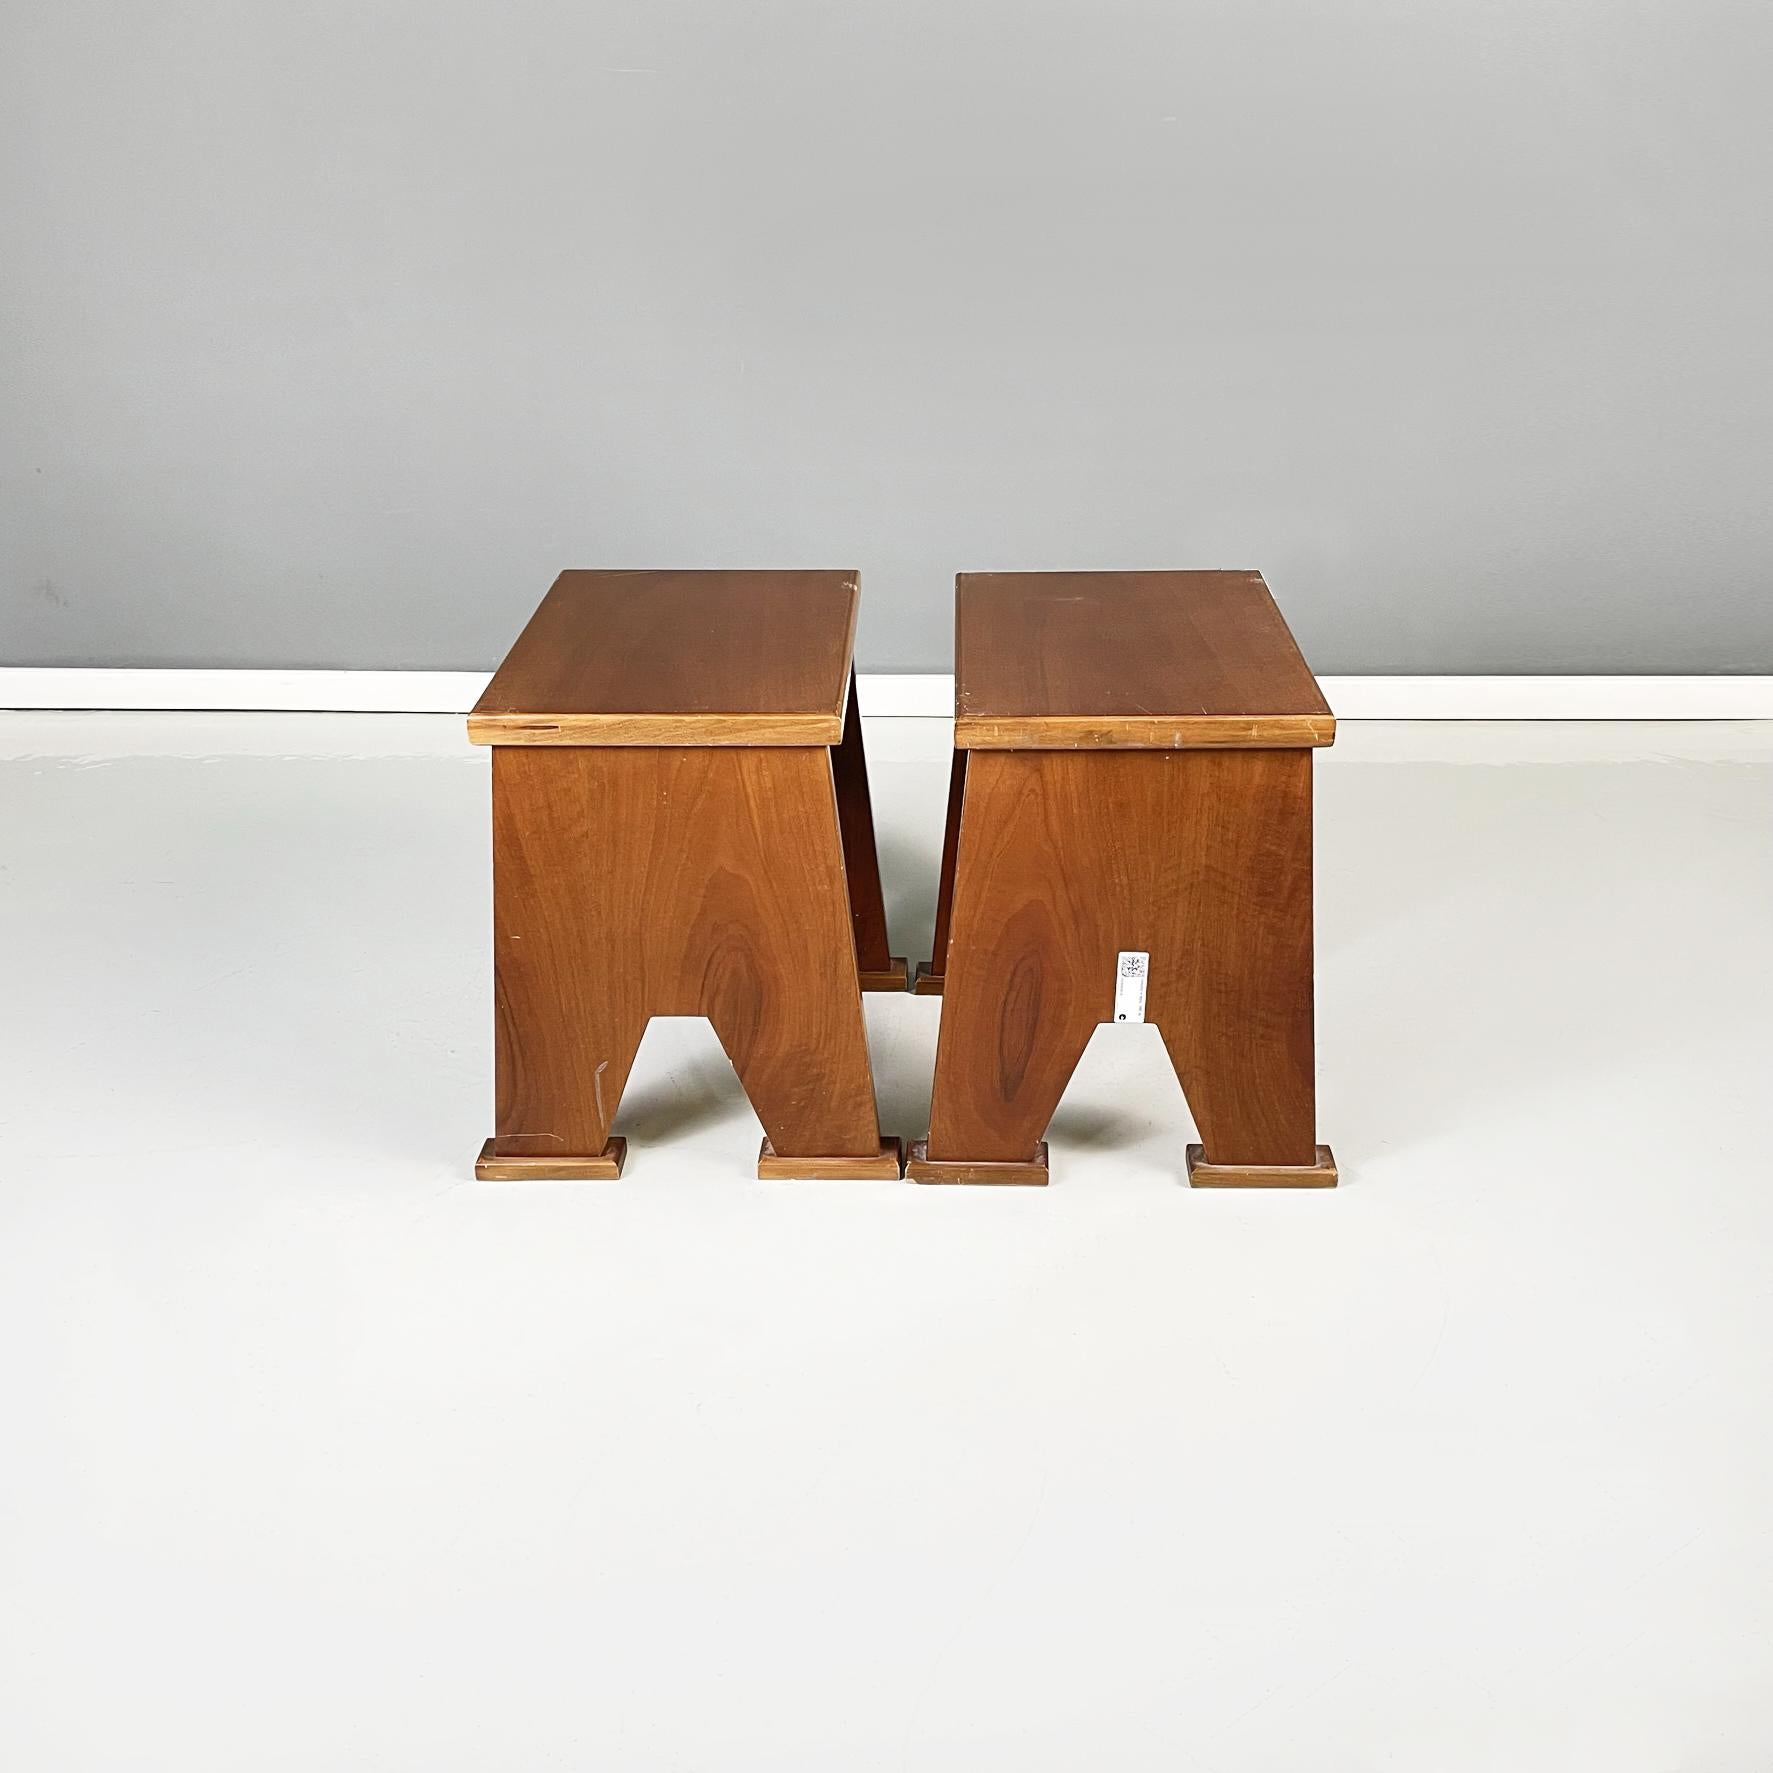 Italian modern wooden rectangular stools in art deco style, 1970s
Pair of stools with rectangular wooden seat. The legs are rectangular in section joined in the middle by a beam. Rectangular feet. Usable as bedside tables, exhibitors or low side